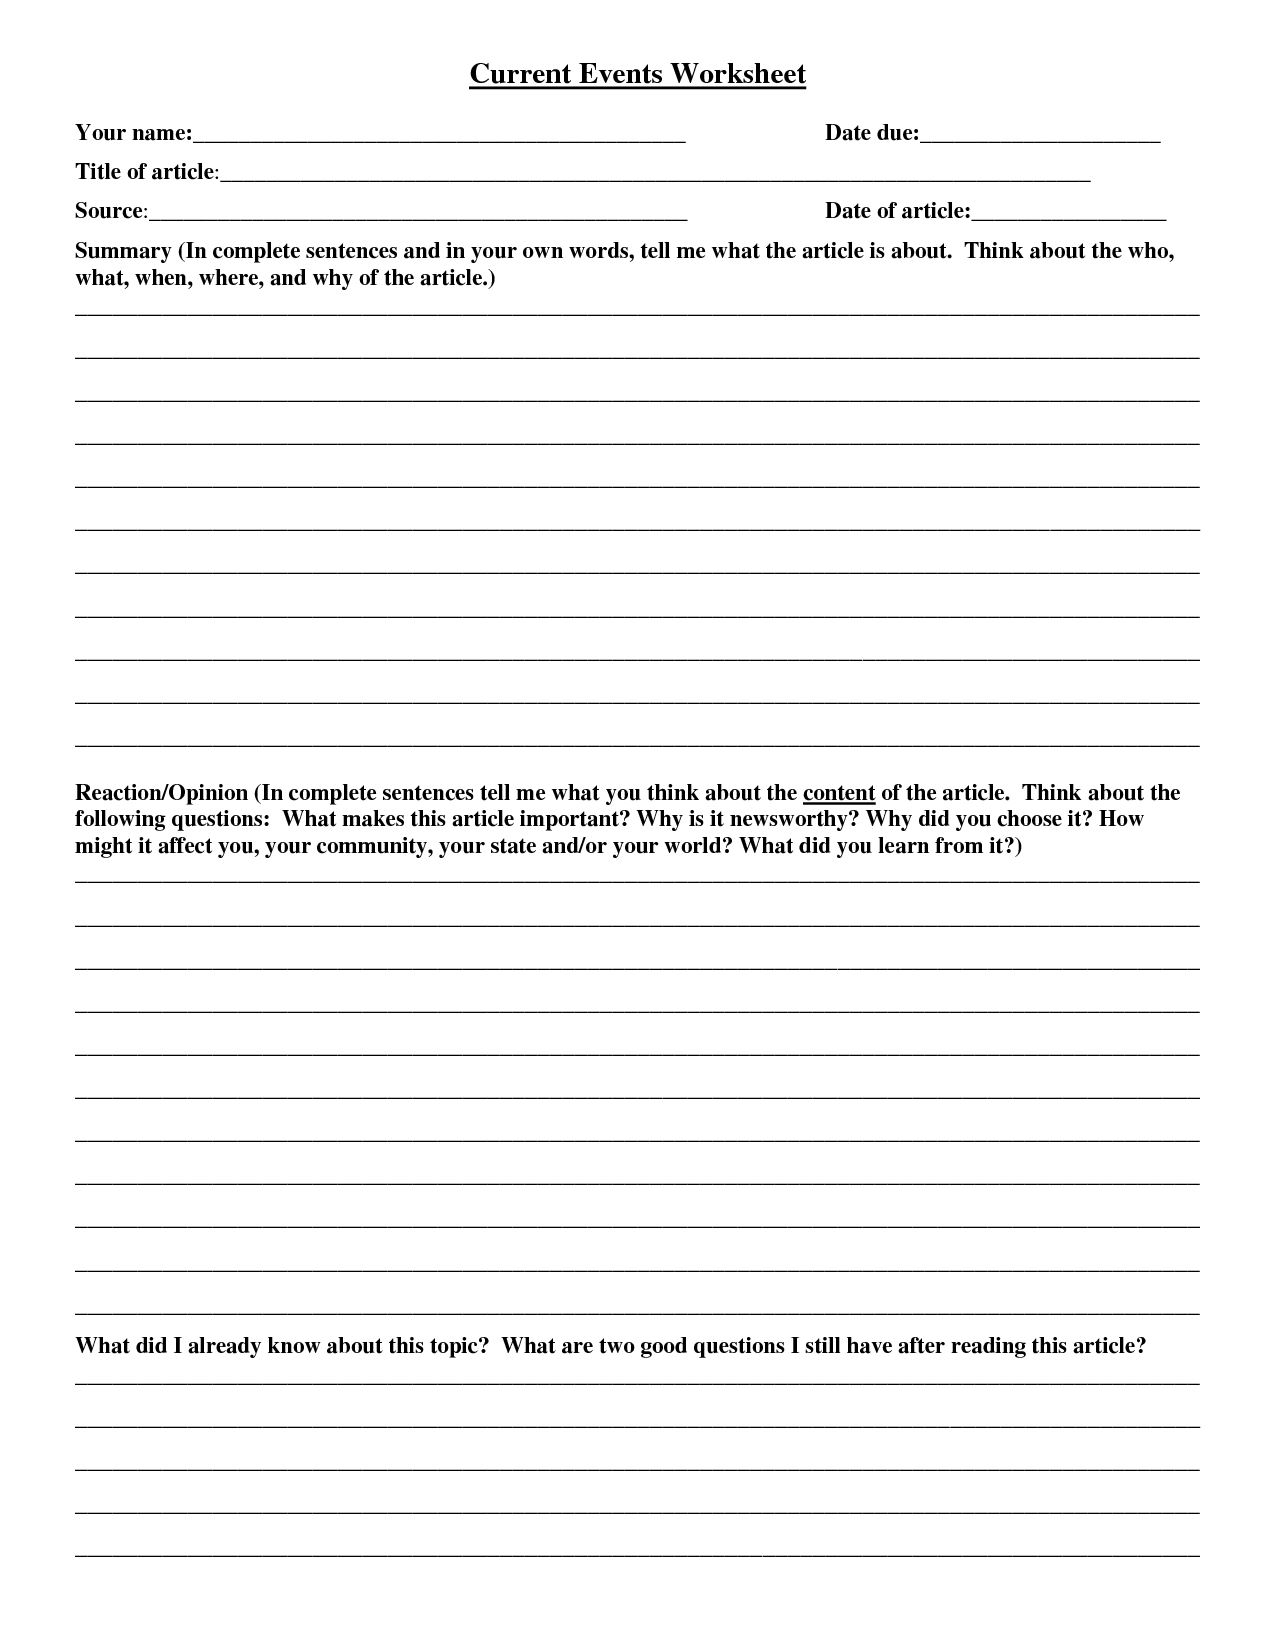 18-best-images-of-current-events-worksheet-template-elementary